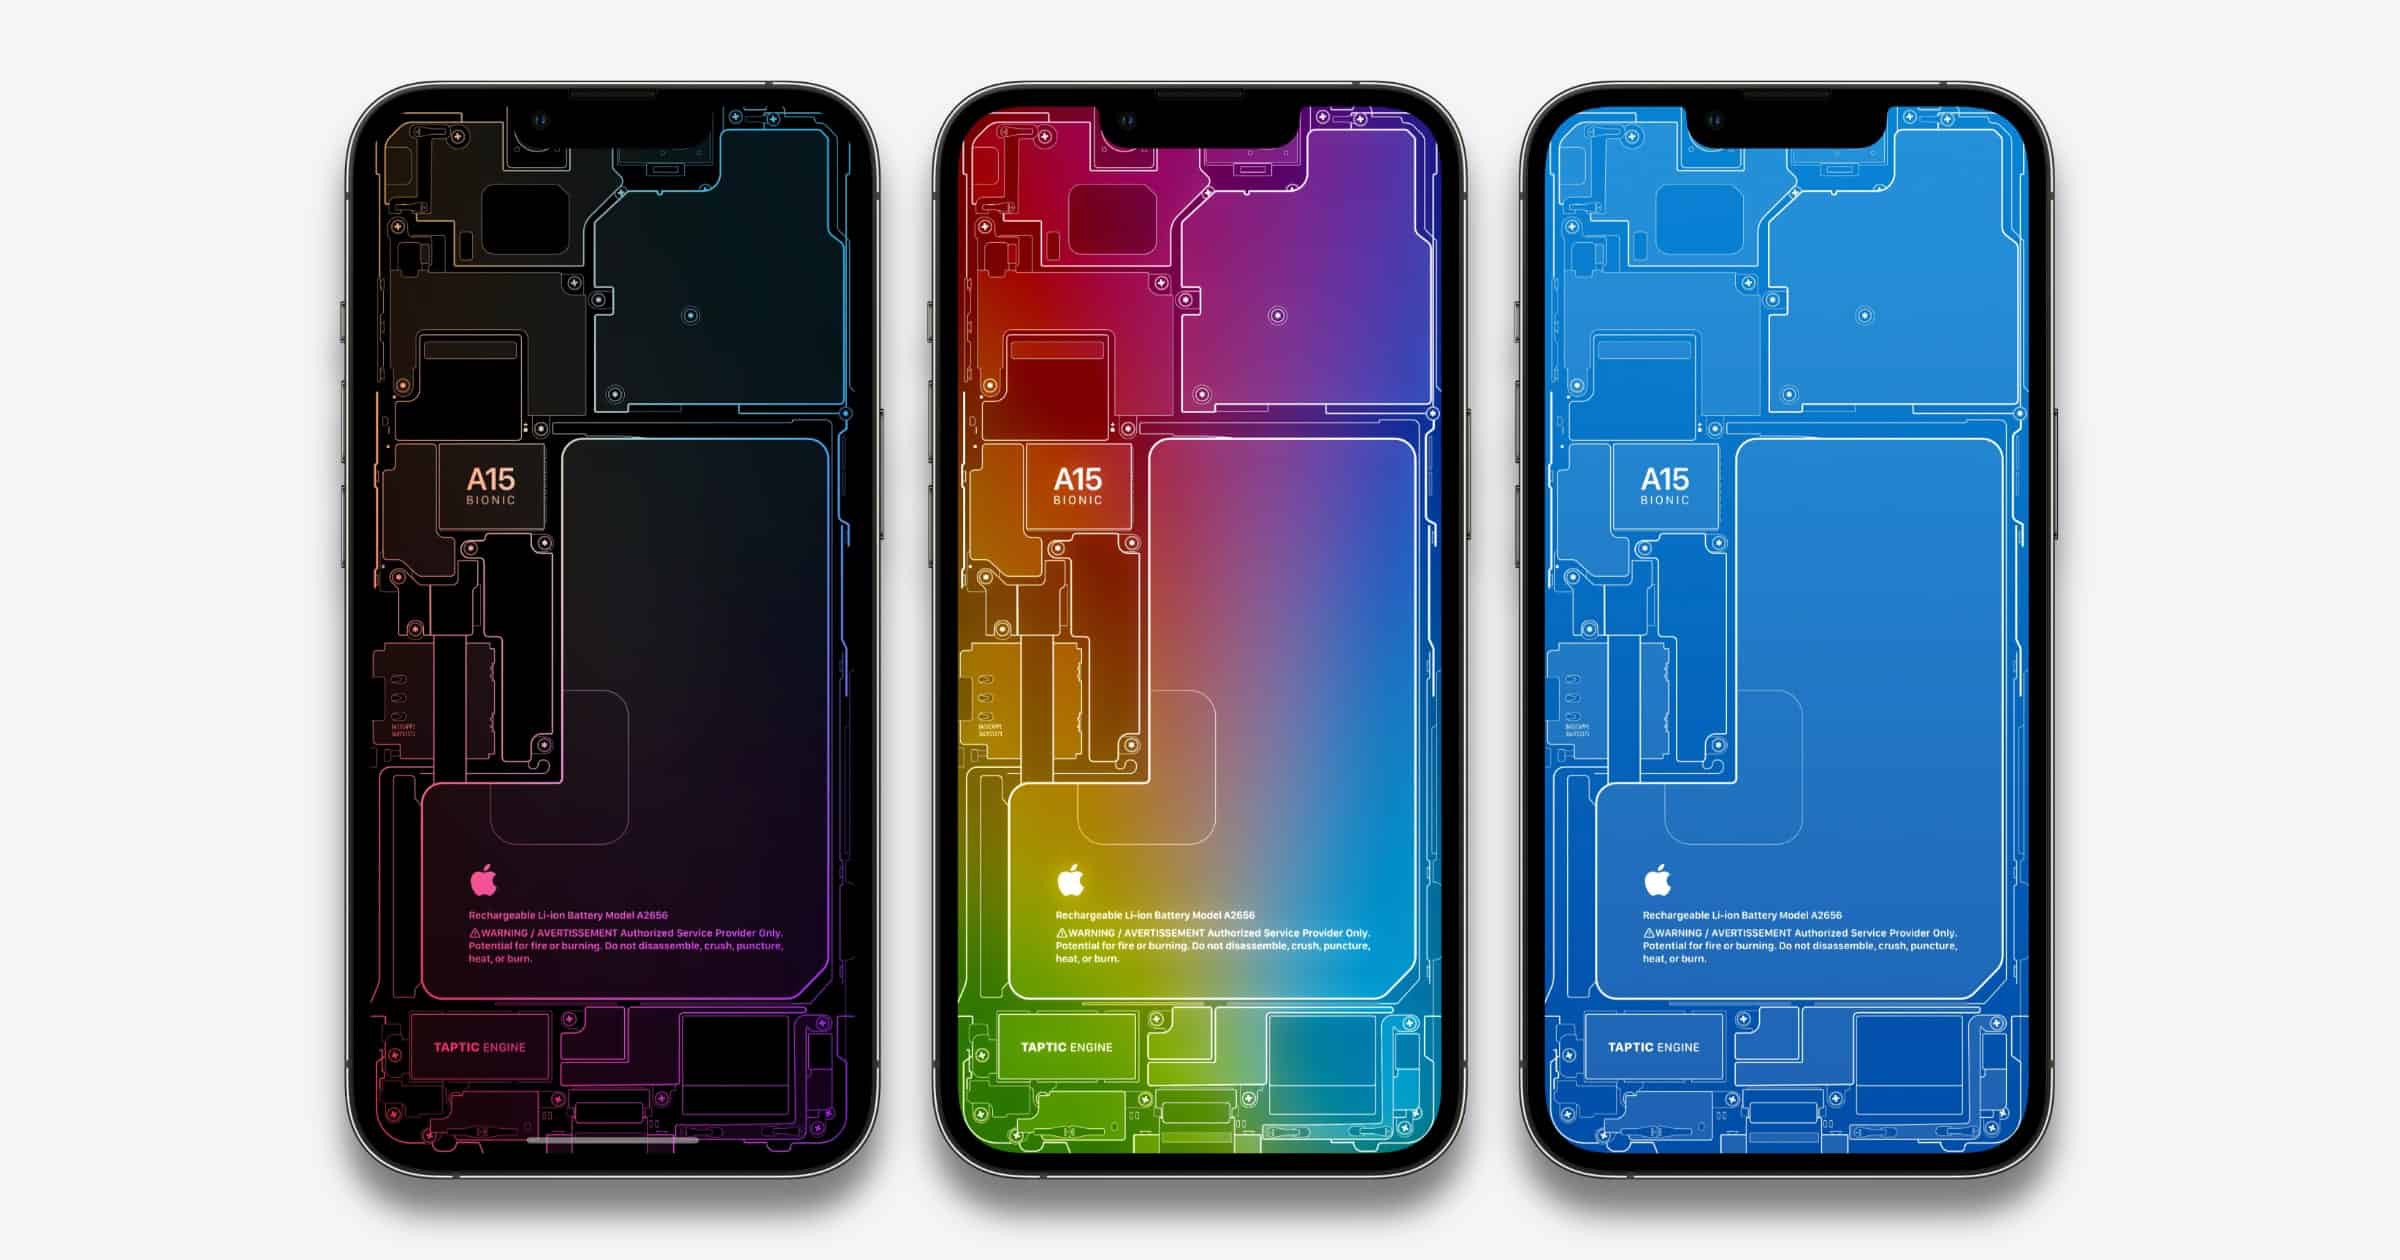 iPhone SE 2020 Wallpapers Are Definitely Not iPhone 8 Wallpapers  Absolutely Not Get Out of Here With That Wild Unfounded Speculation You  Ridiculous Weirdo  iFixit News